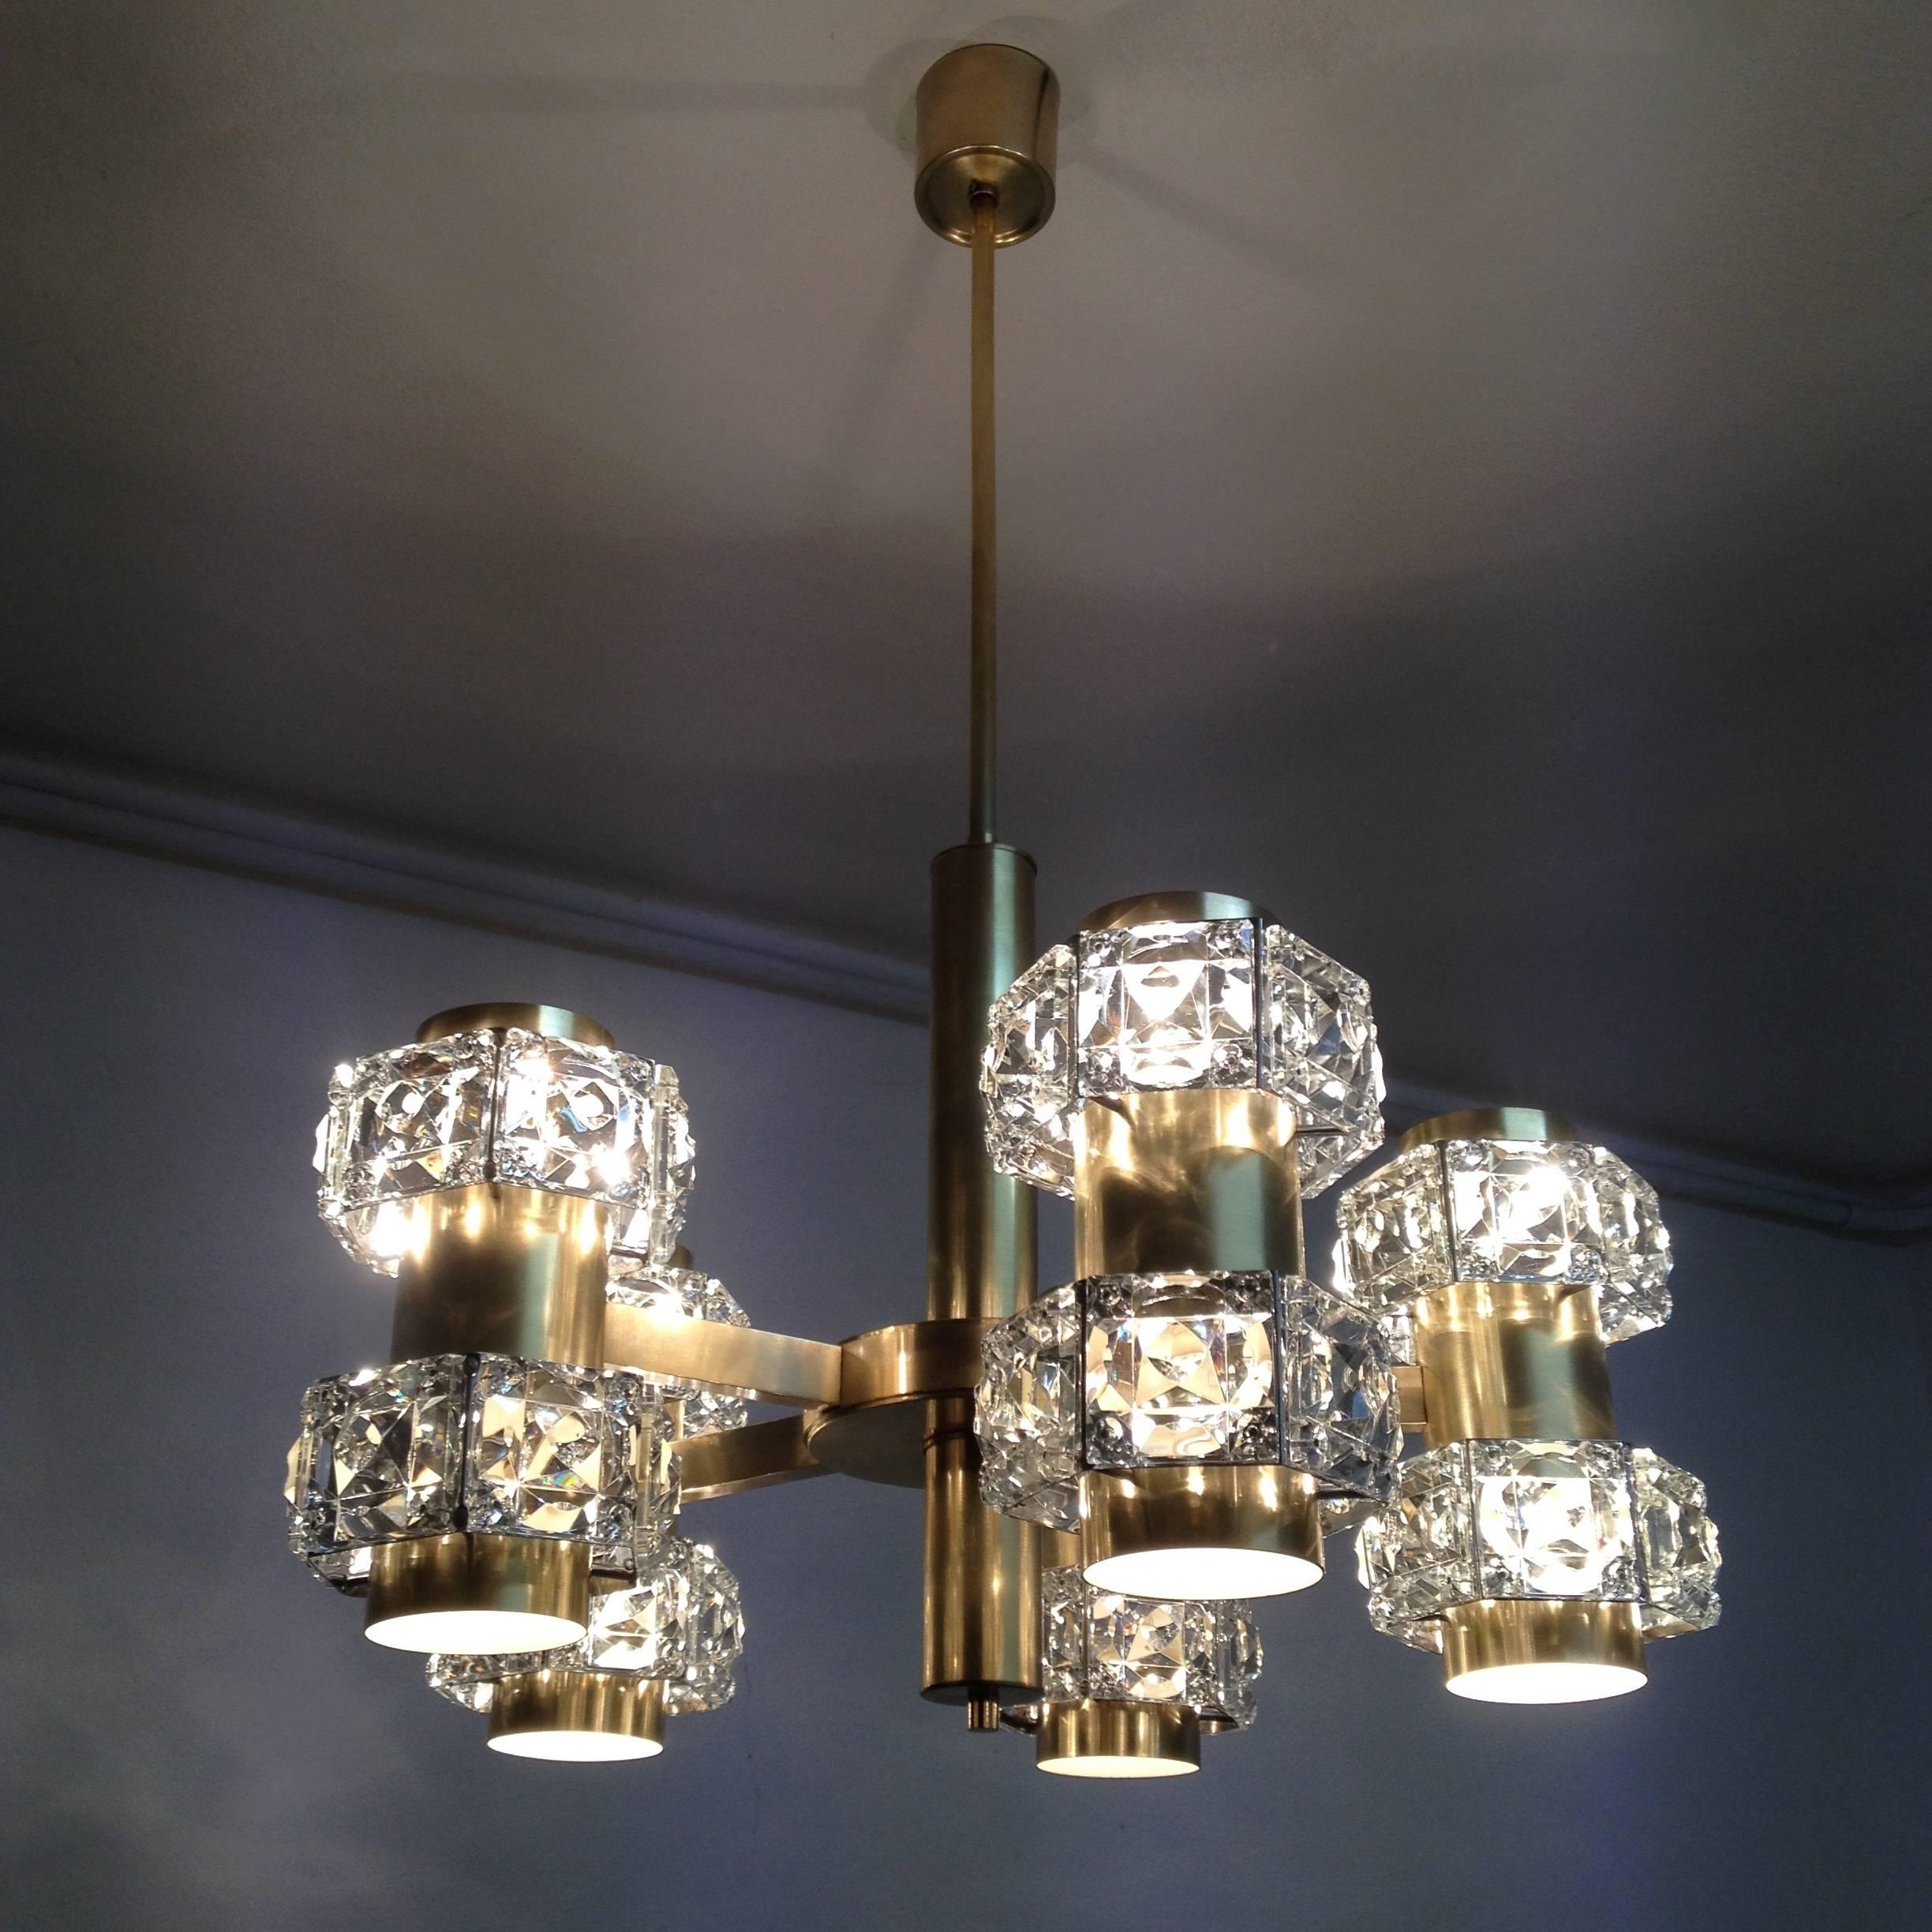 This is a rare and quite spectacular chandelier with five arms and double light fittings creating an up and down light effect which is being spread beautifully by the crystals that embrace the sconces that are set on the end of each arm. The brass